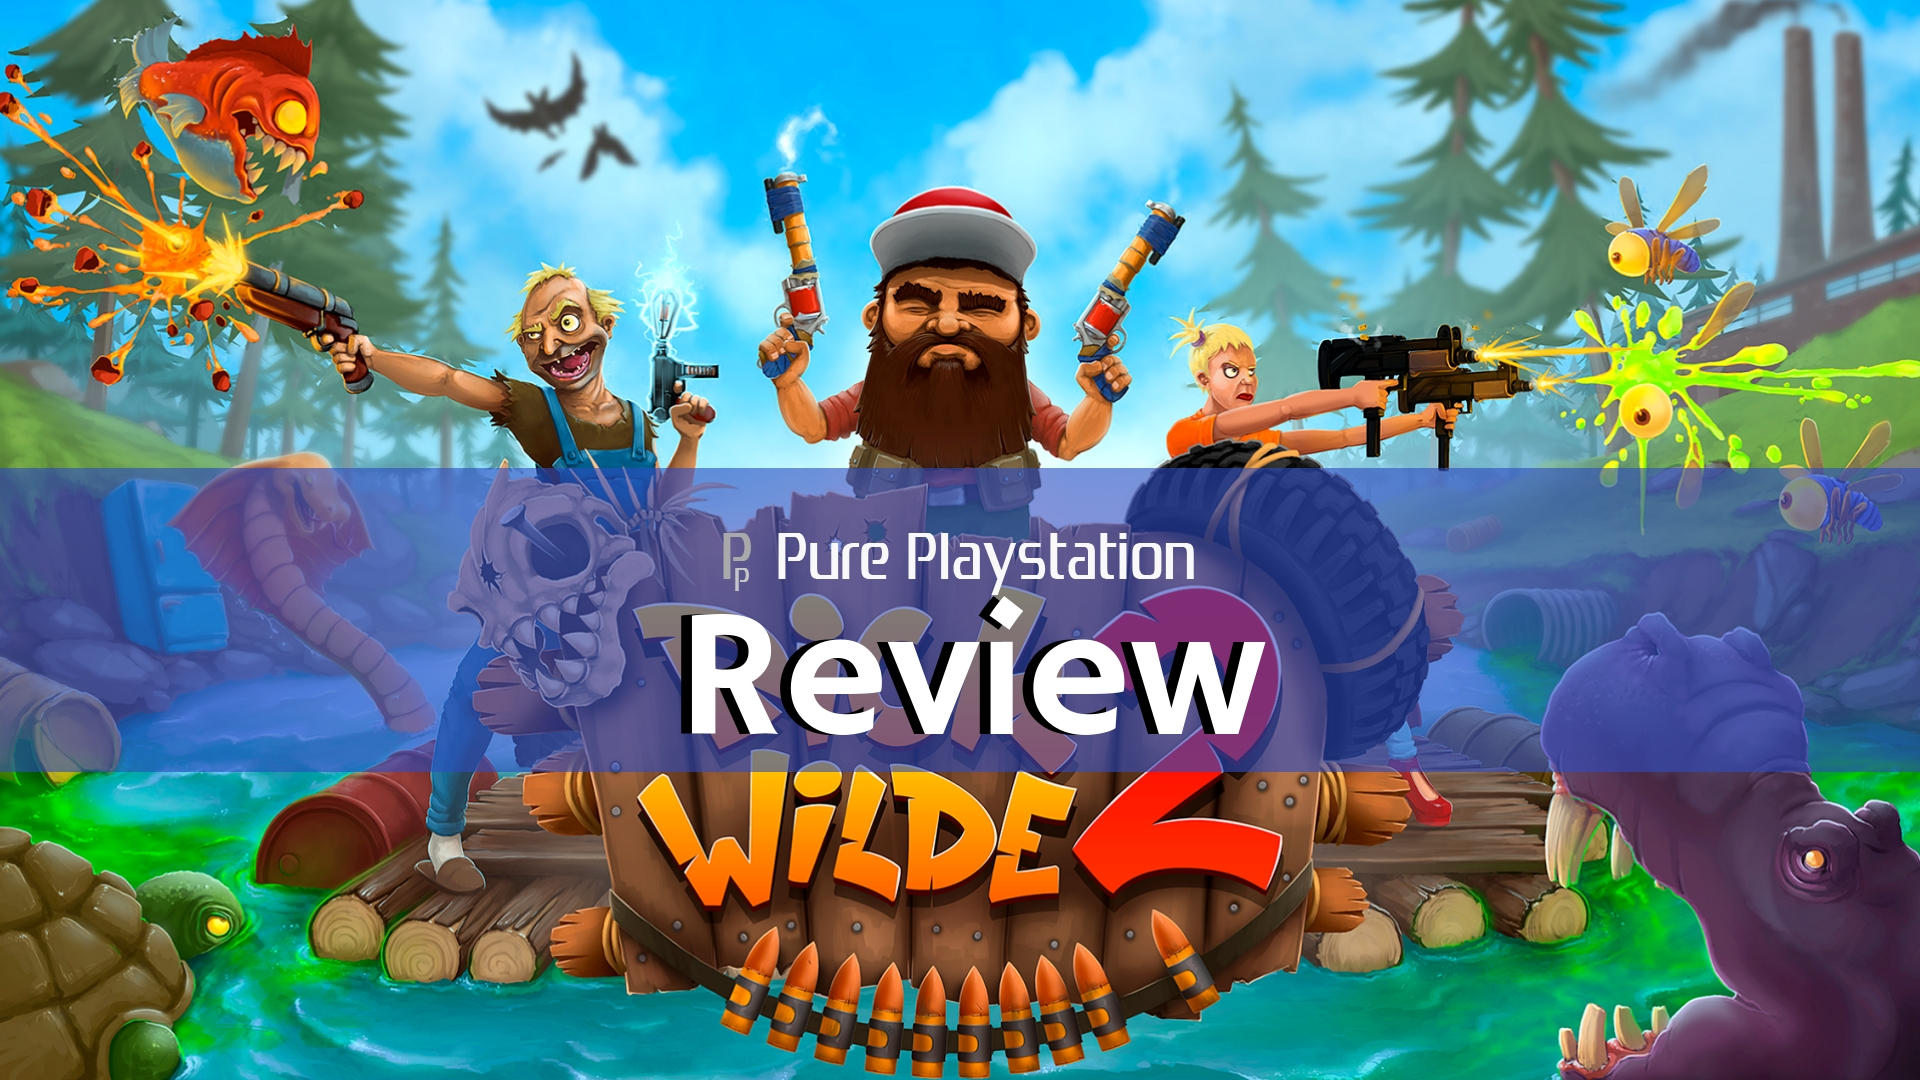 Review: Dick Wilde 2 - PS4/PSVR